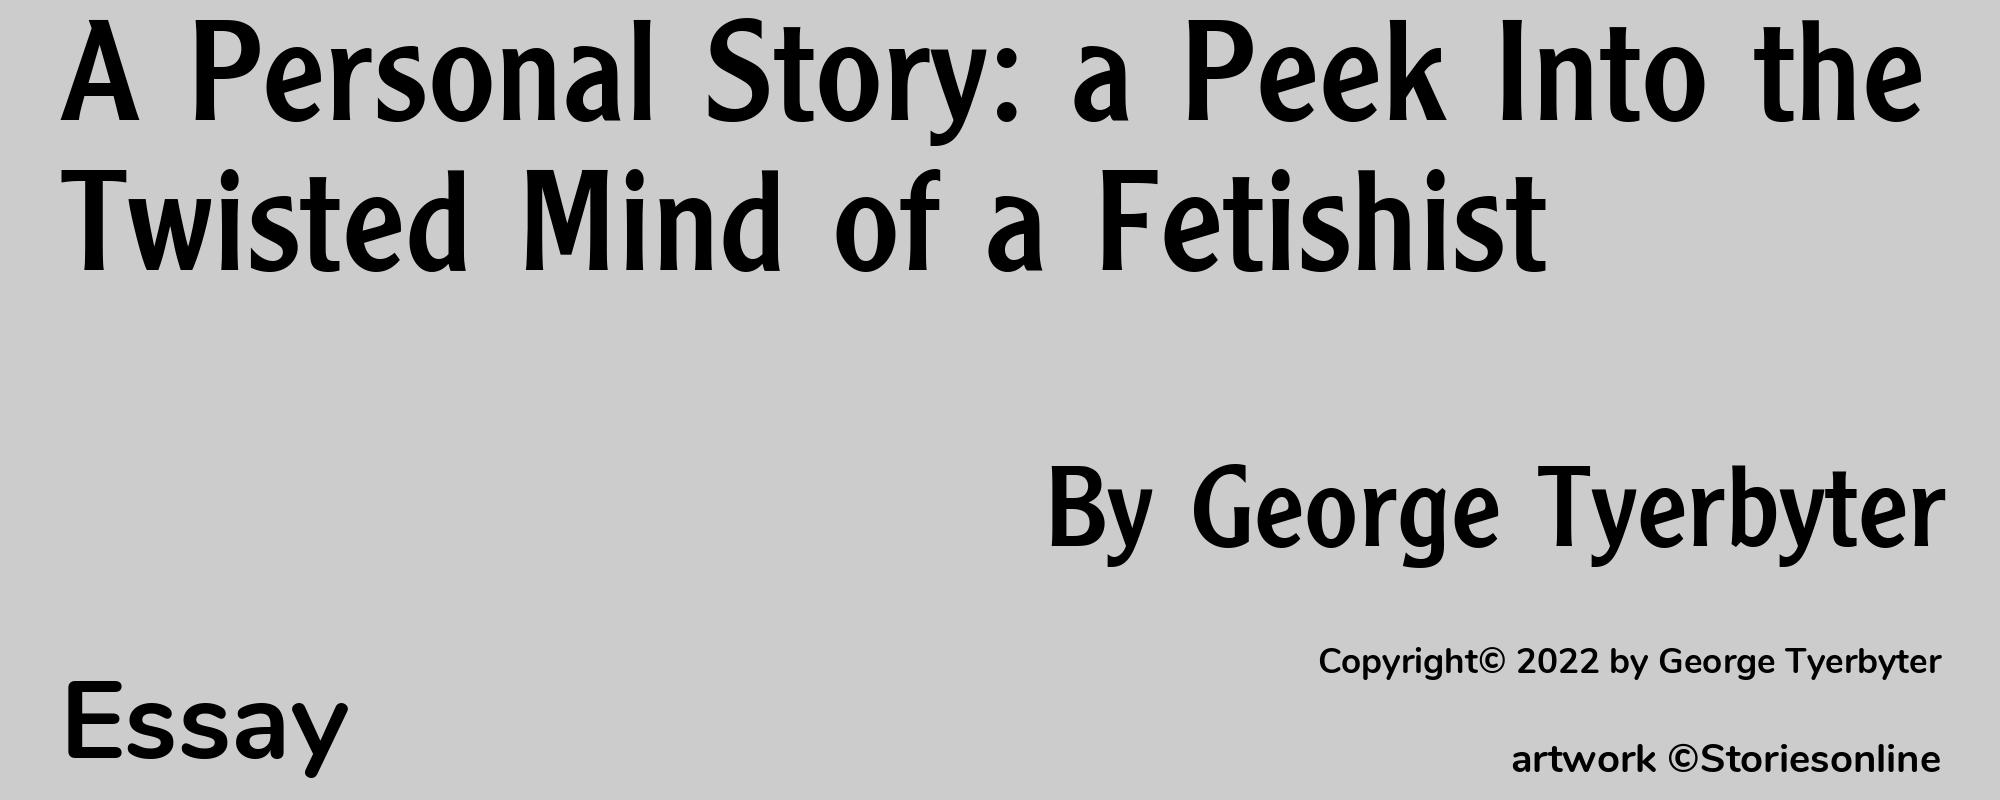 A Personal Story: a Peek Into the Twisted Mind of a Fetishist - Cover